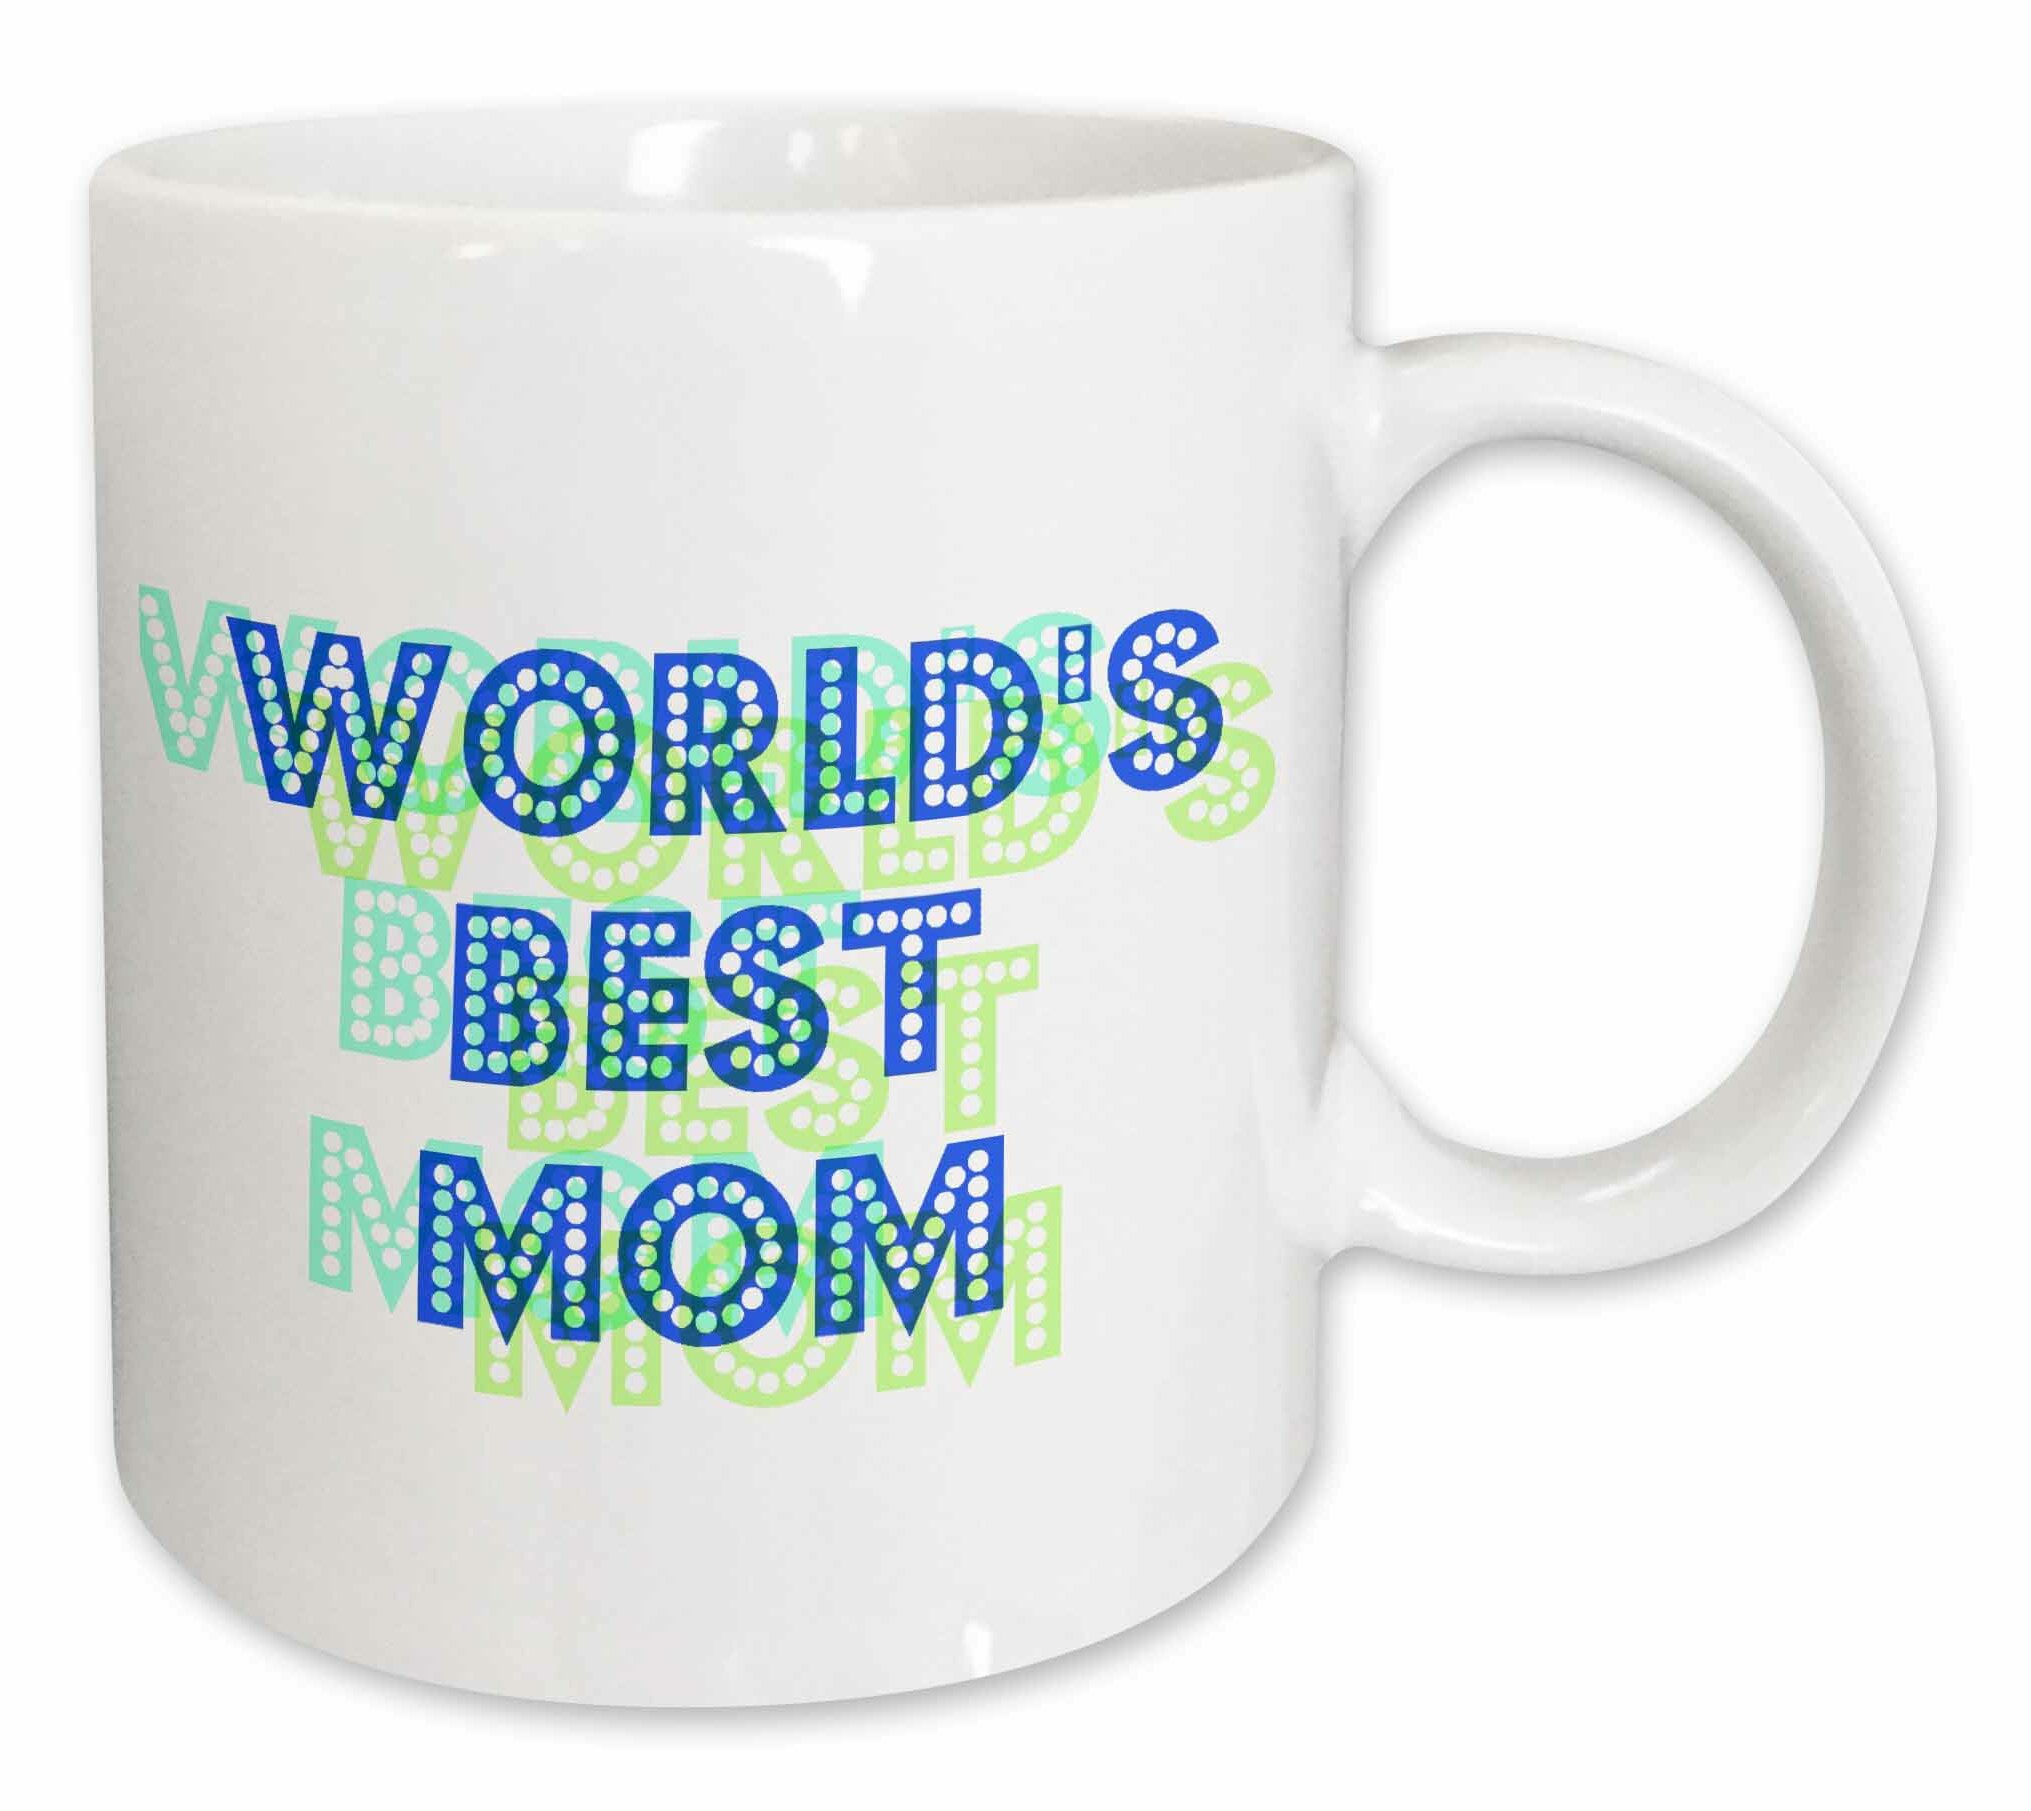 worlds best mom cup